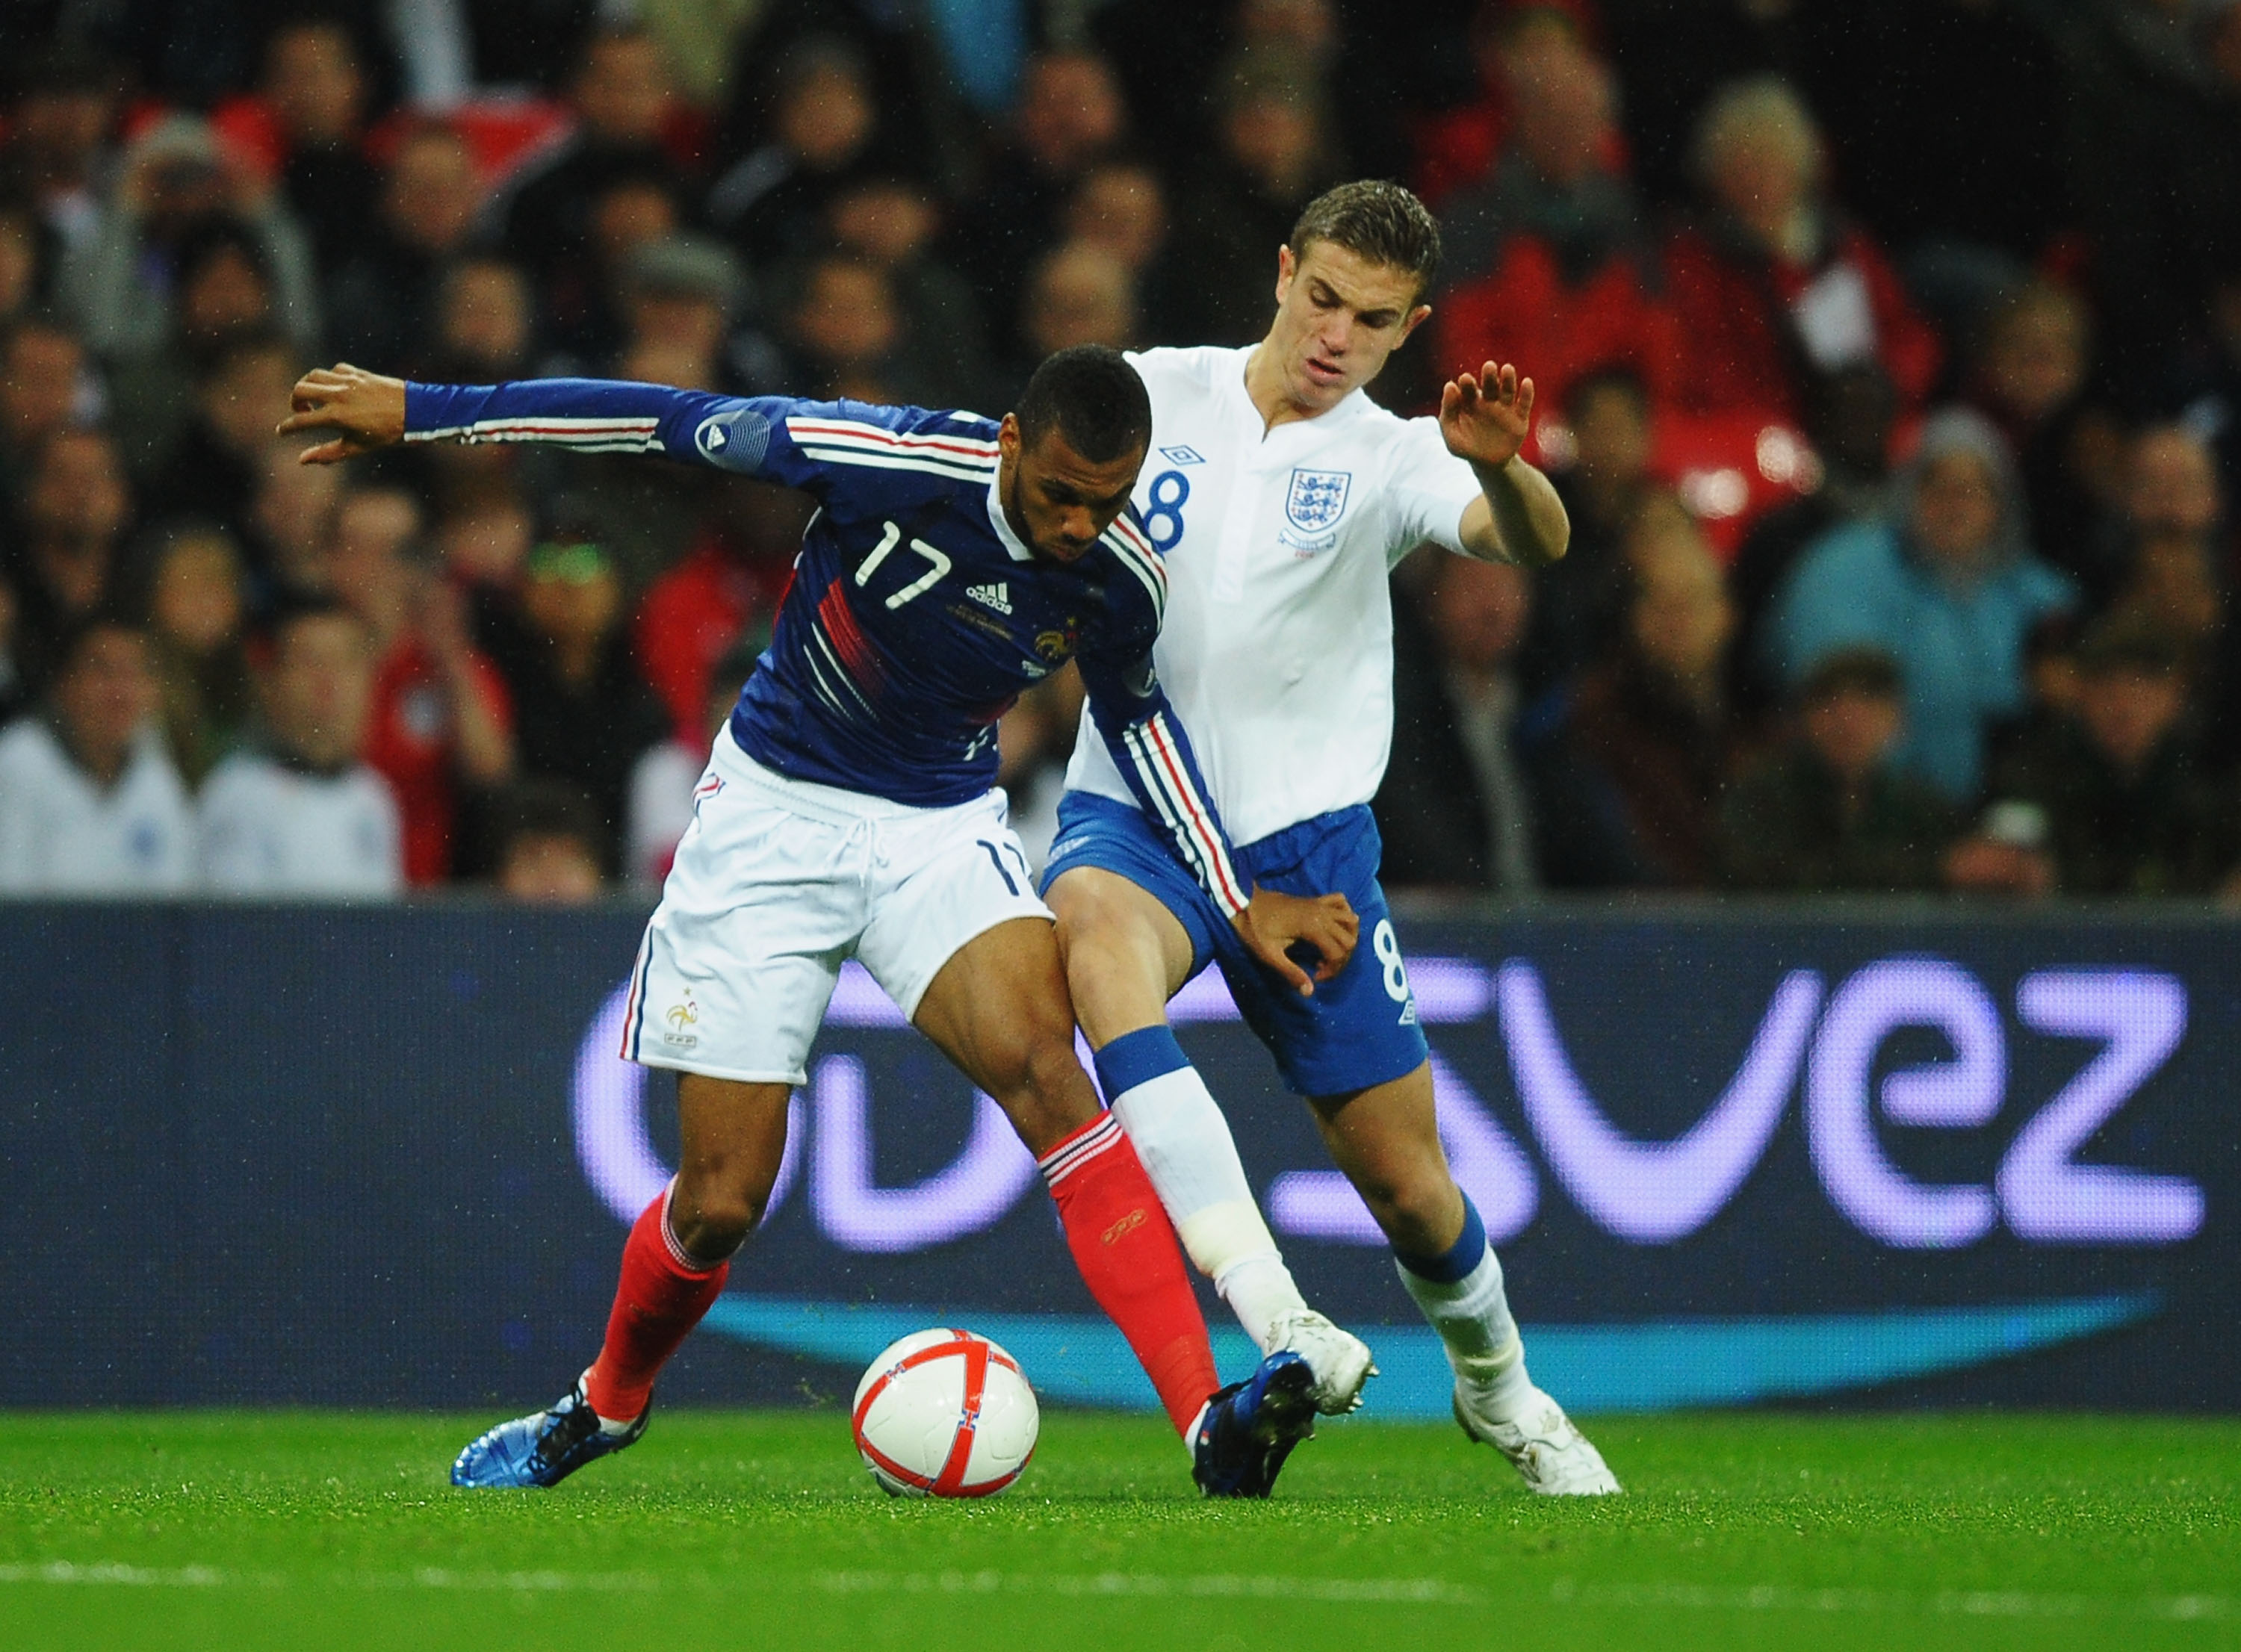 LONDON, ENGLAND - NOVEMBER 17:  Yann M'Vila (L) of France holds off the challenge of Jordan Henderson (R) of England during the international friendly match between England and France at Wembley Stadium on November 17, 2010 in London, England.  (Photo by